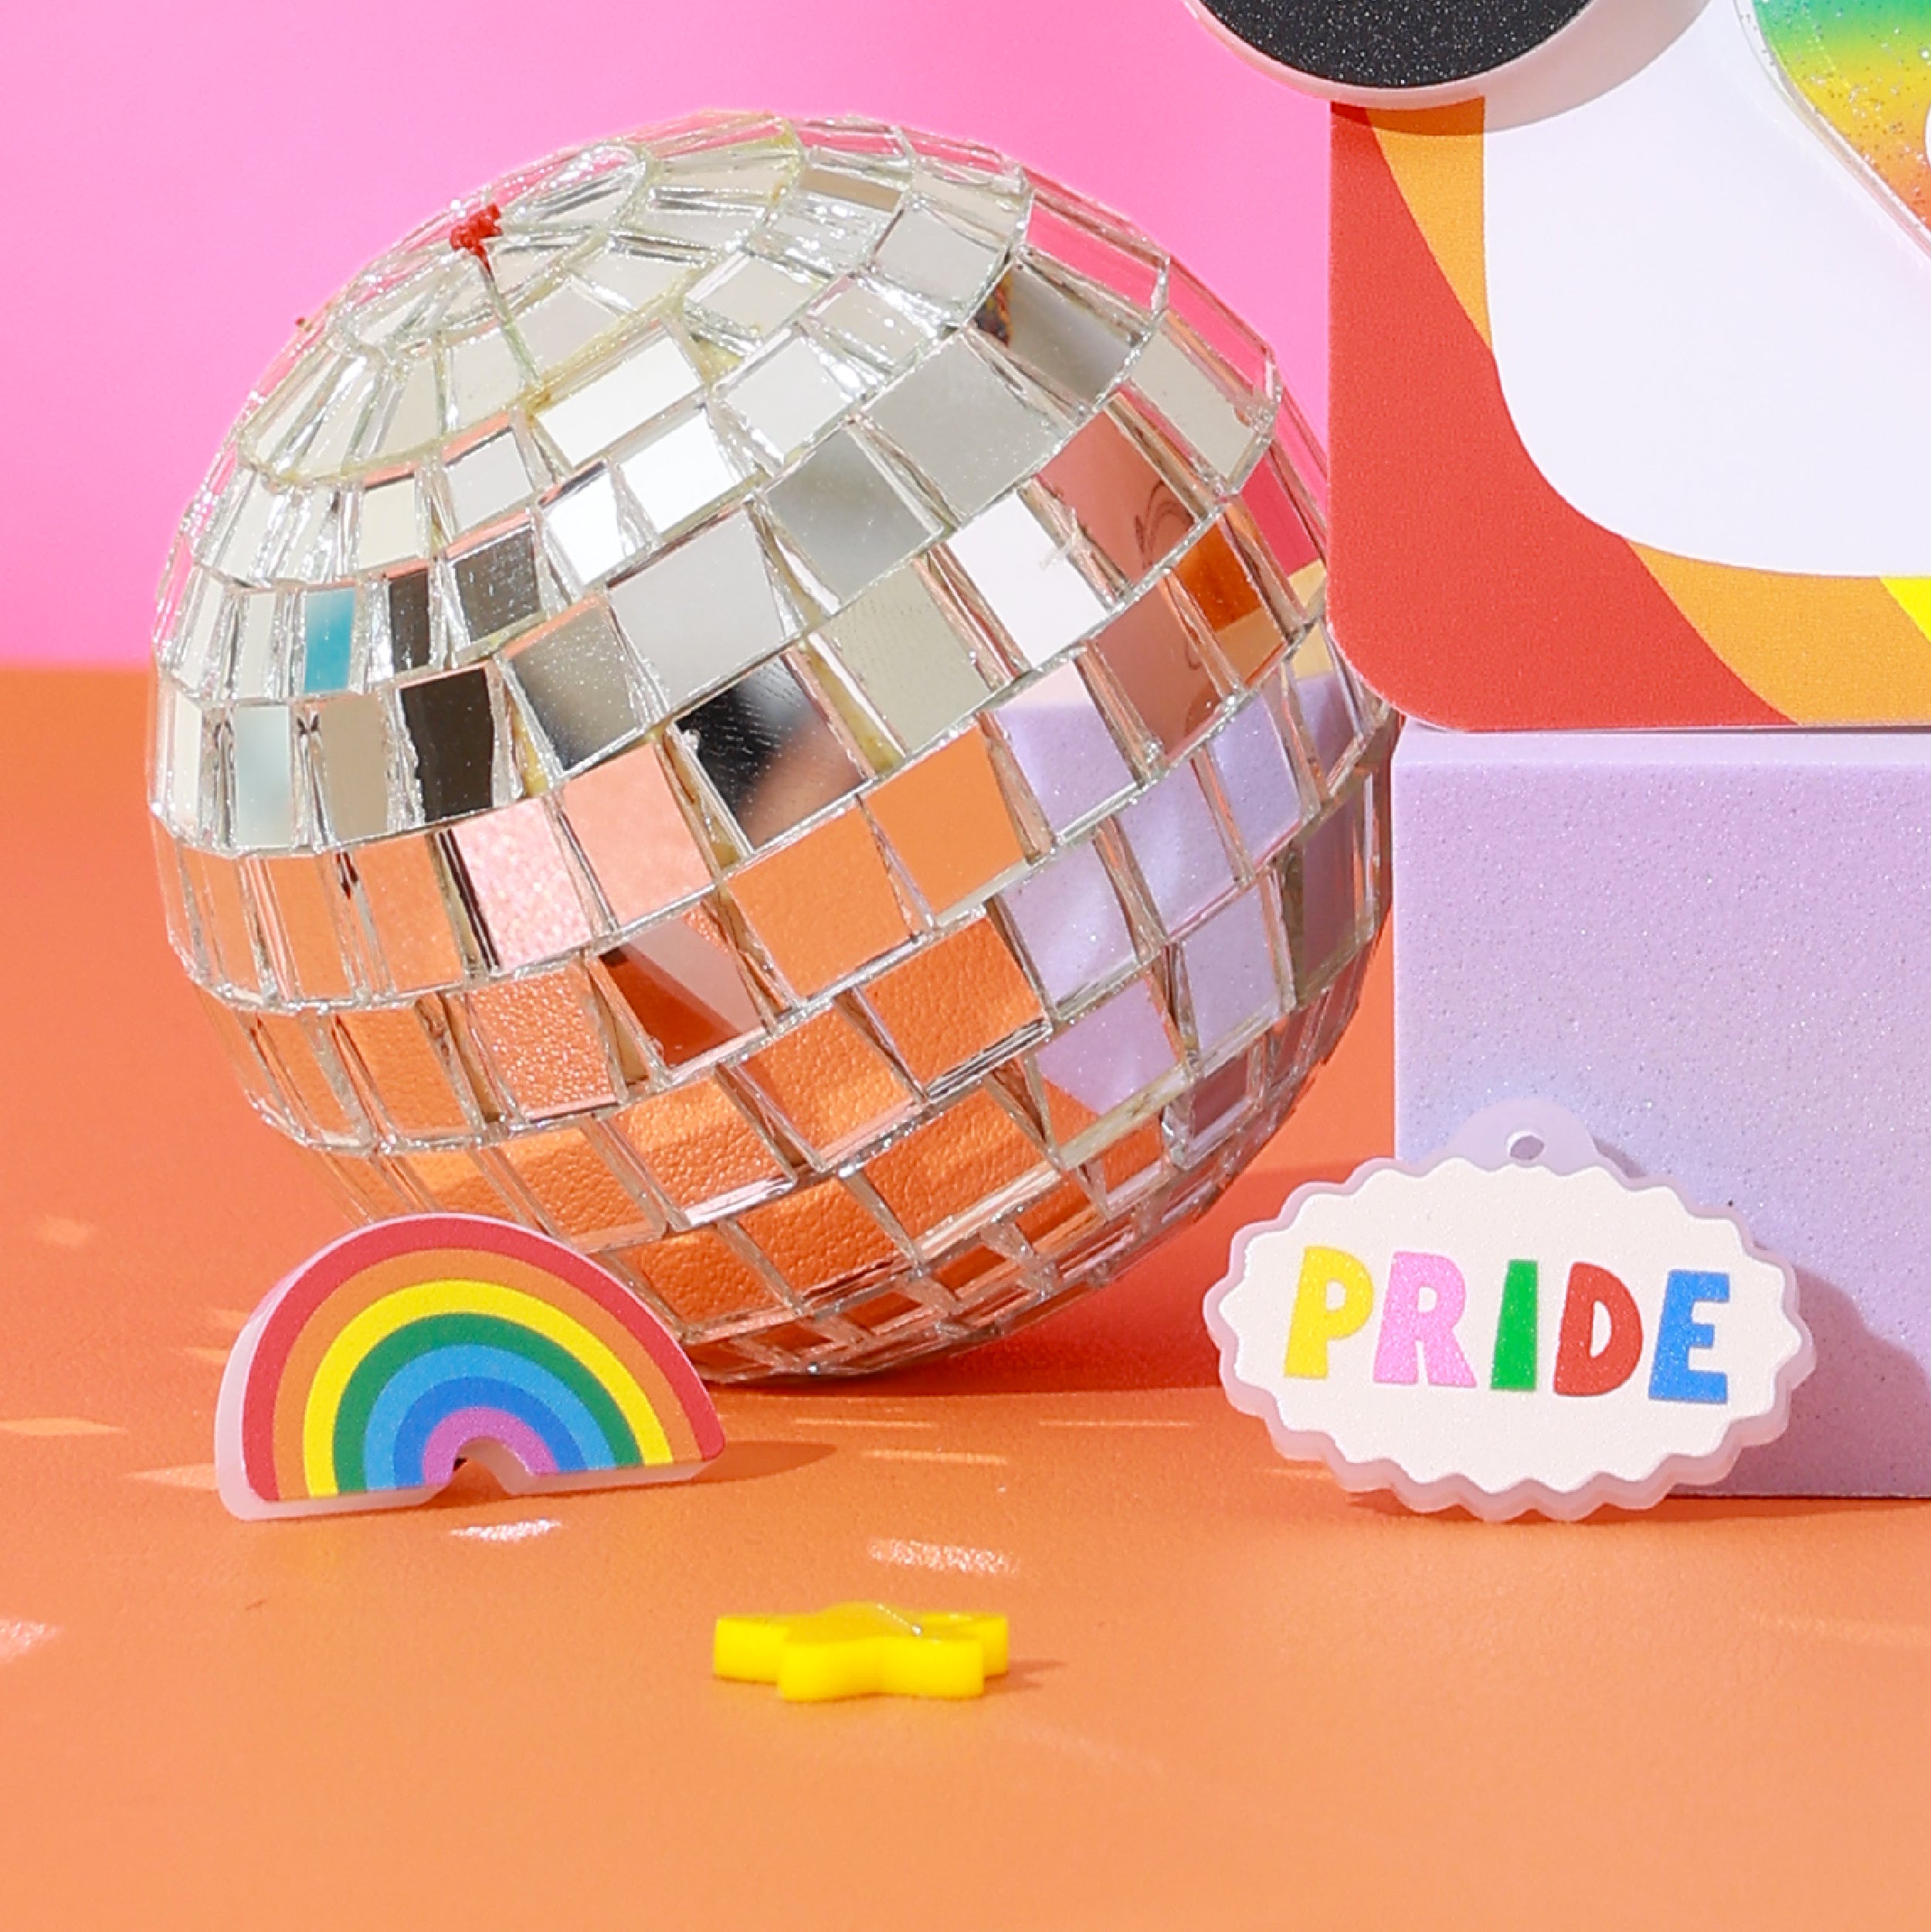 Create your own TAG : Pride parade